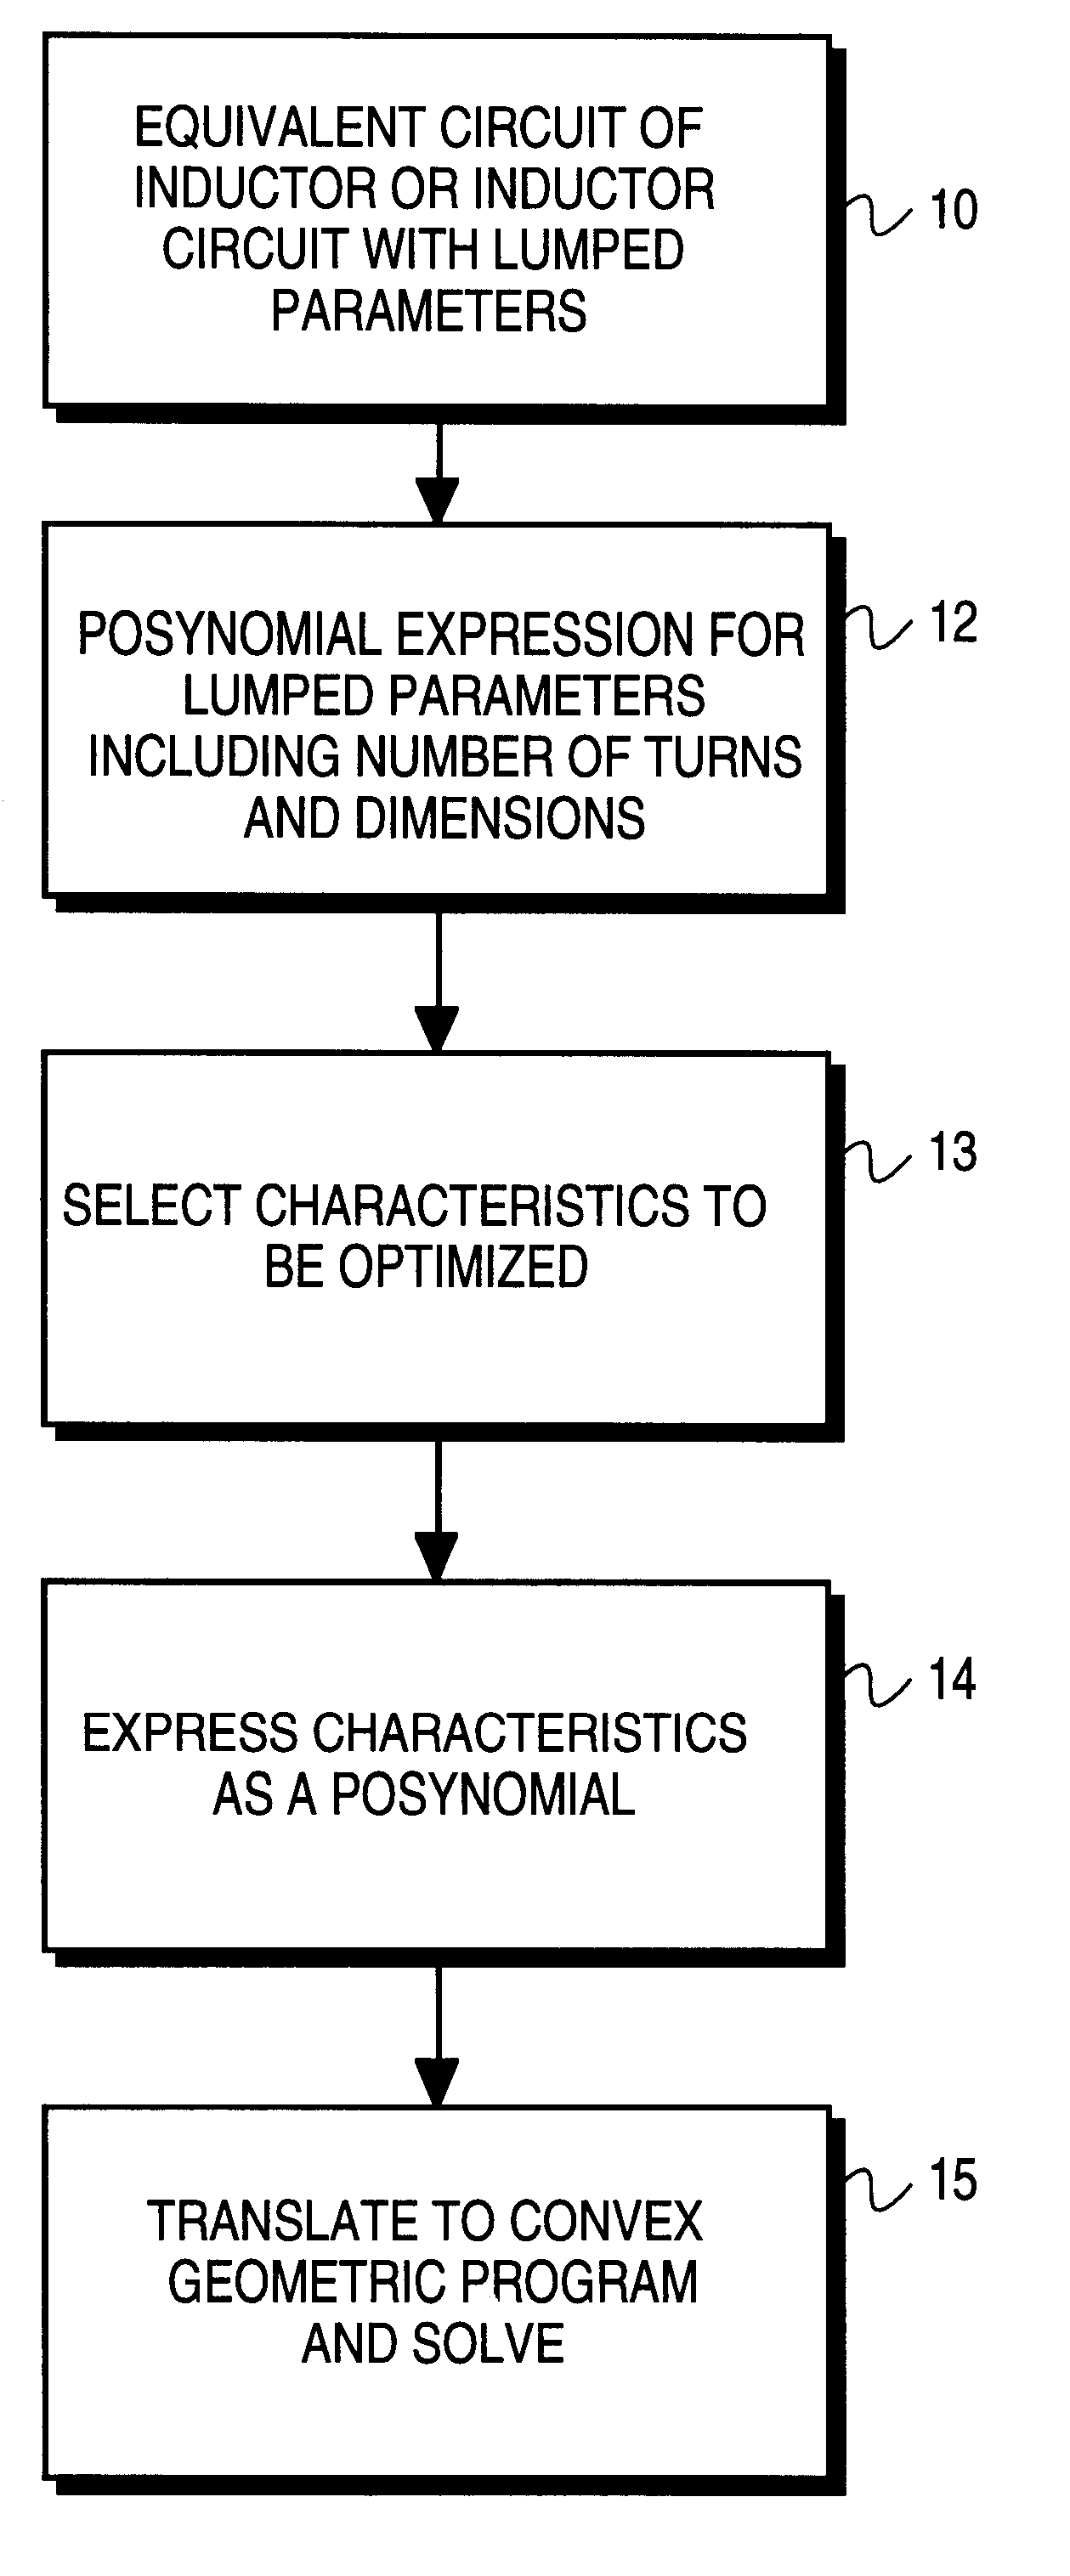 Optimal design of an inductor and inductor circuit